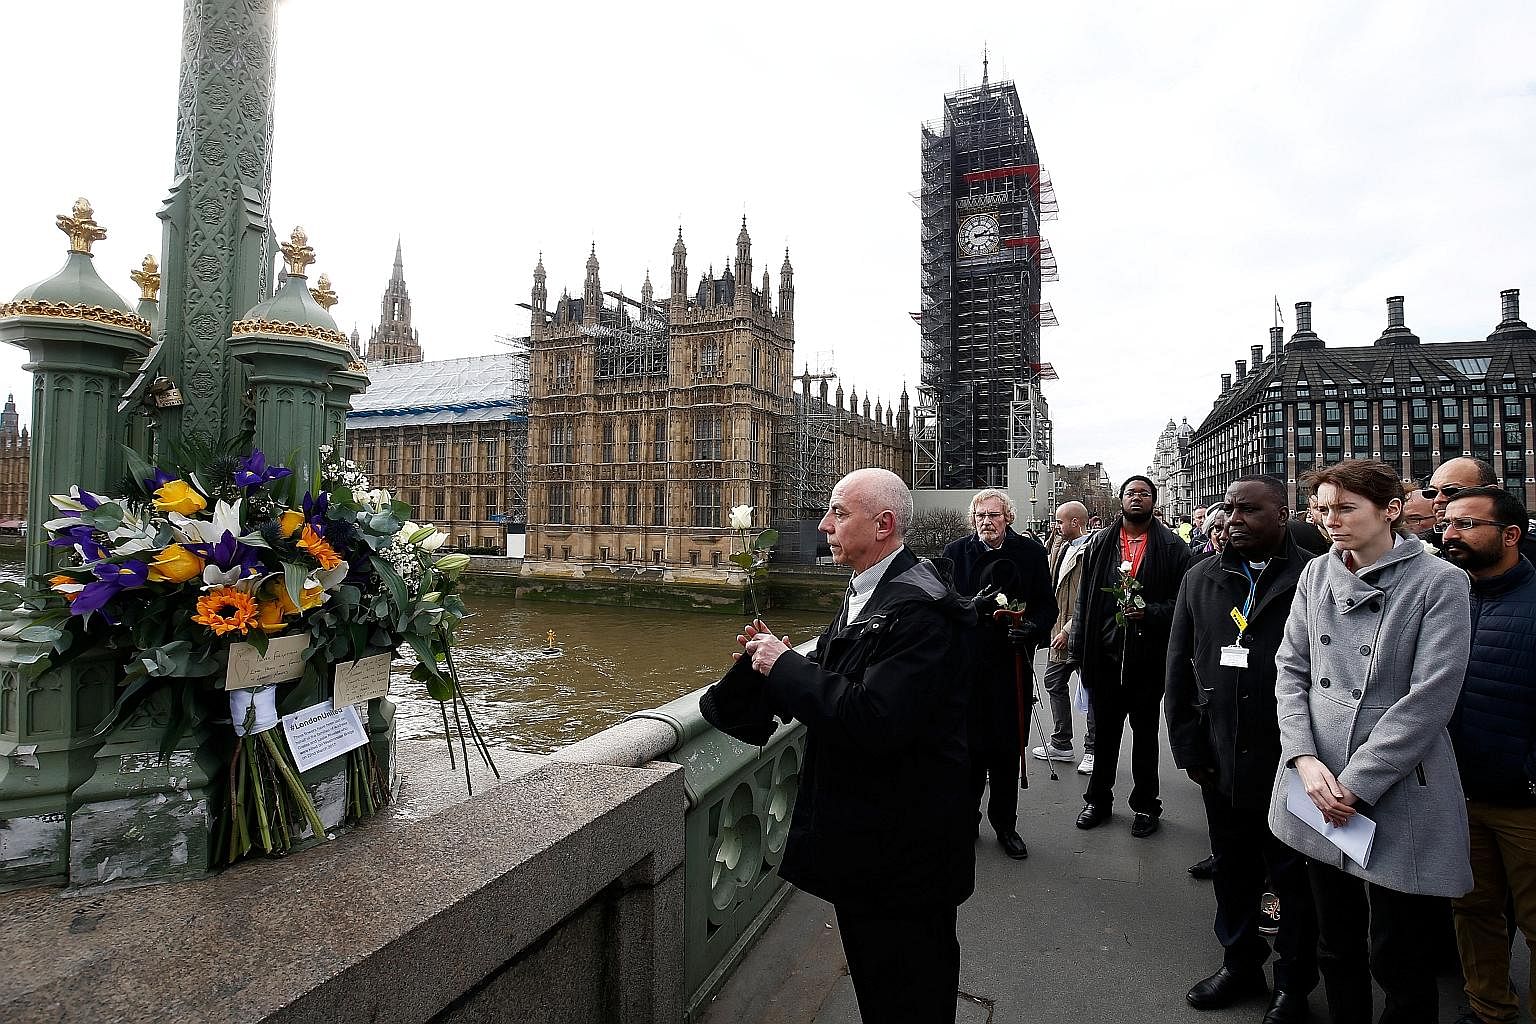 People marking the anniversary of last year's terror attack on London's Westminster Bridge.